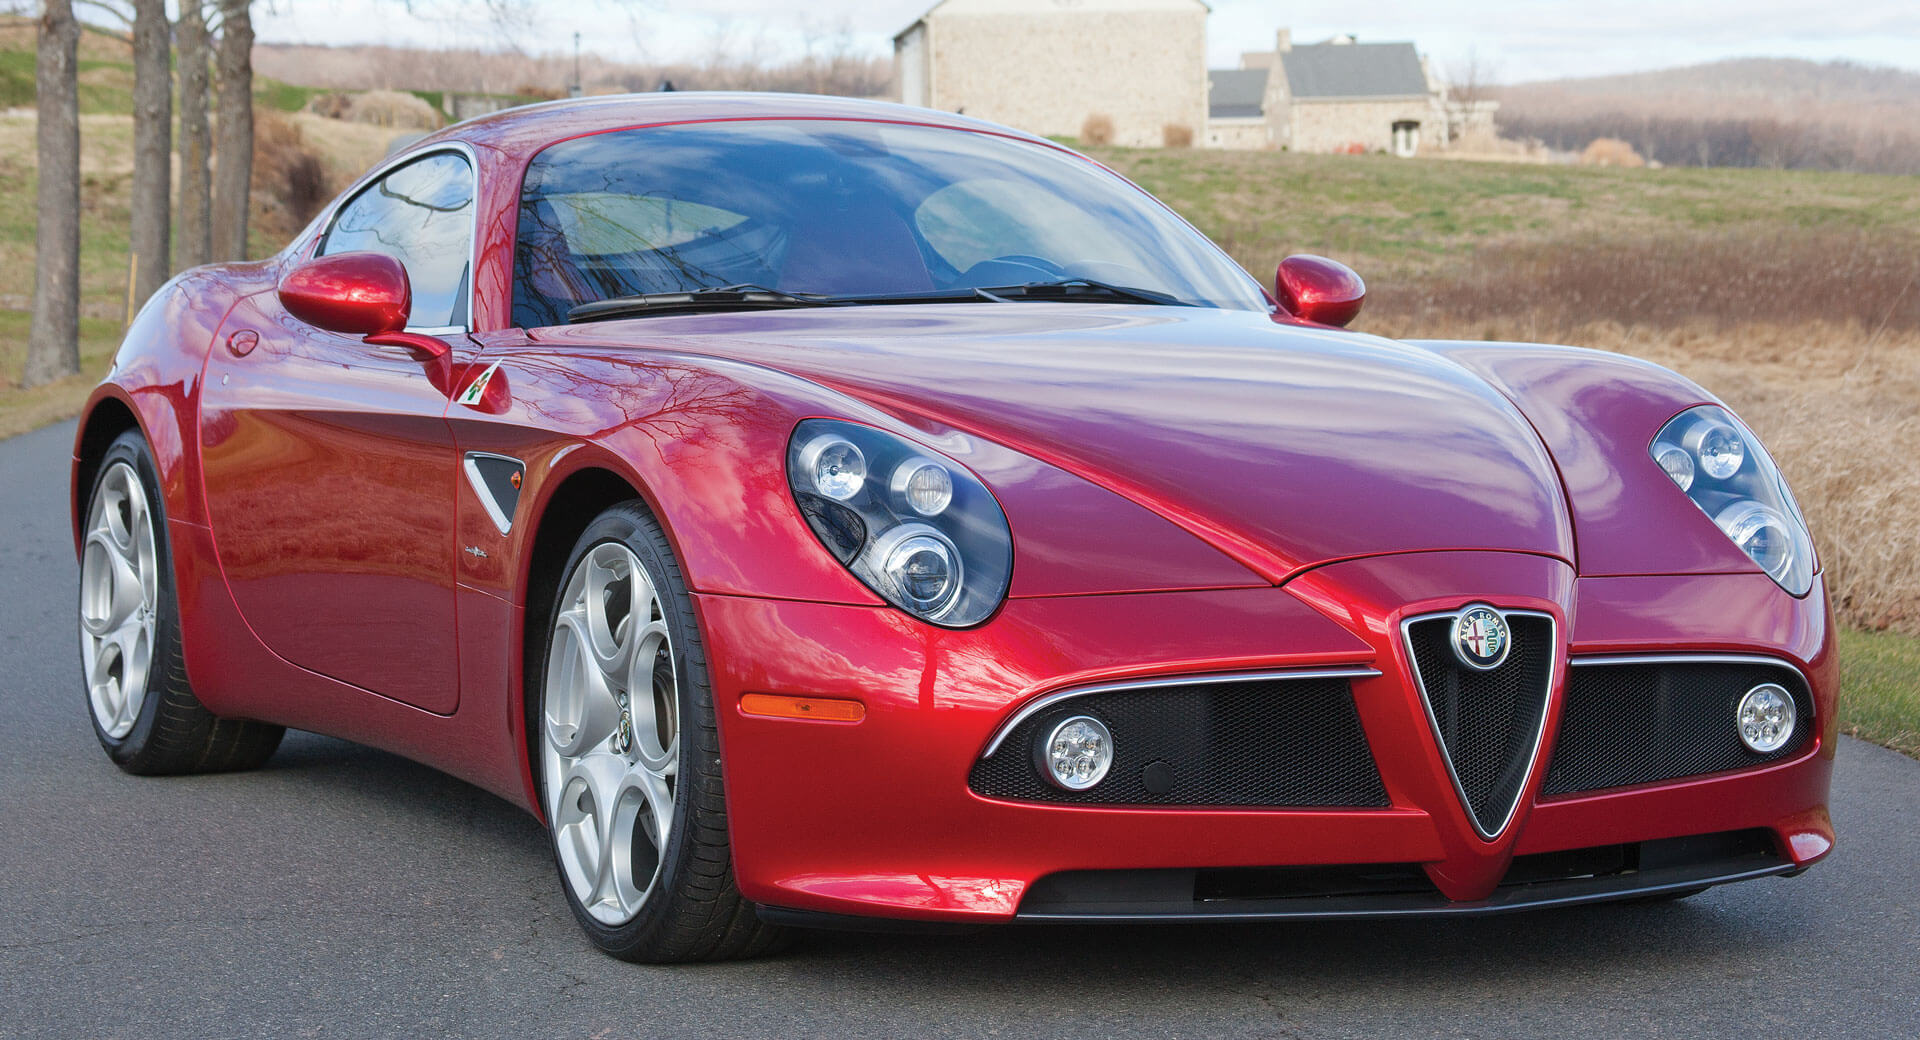 dashing-alfa-romeo-8c-competizione-is-love-at-first-sight-carscoops